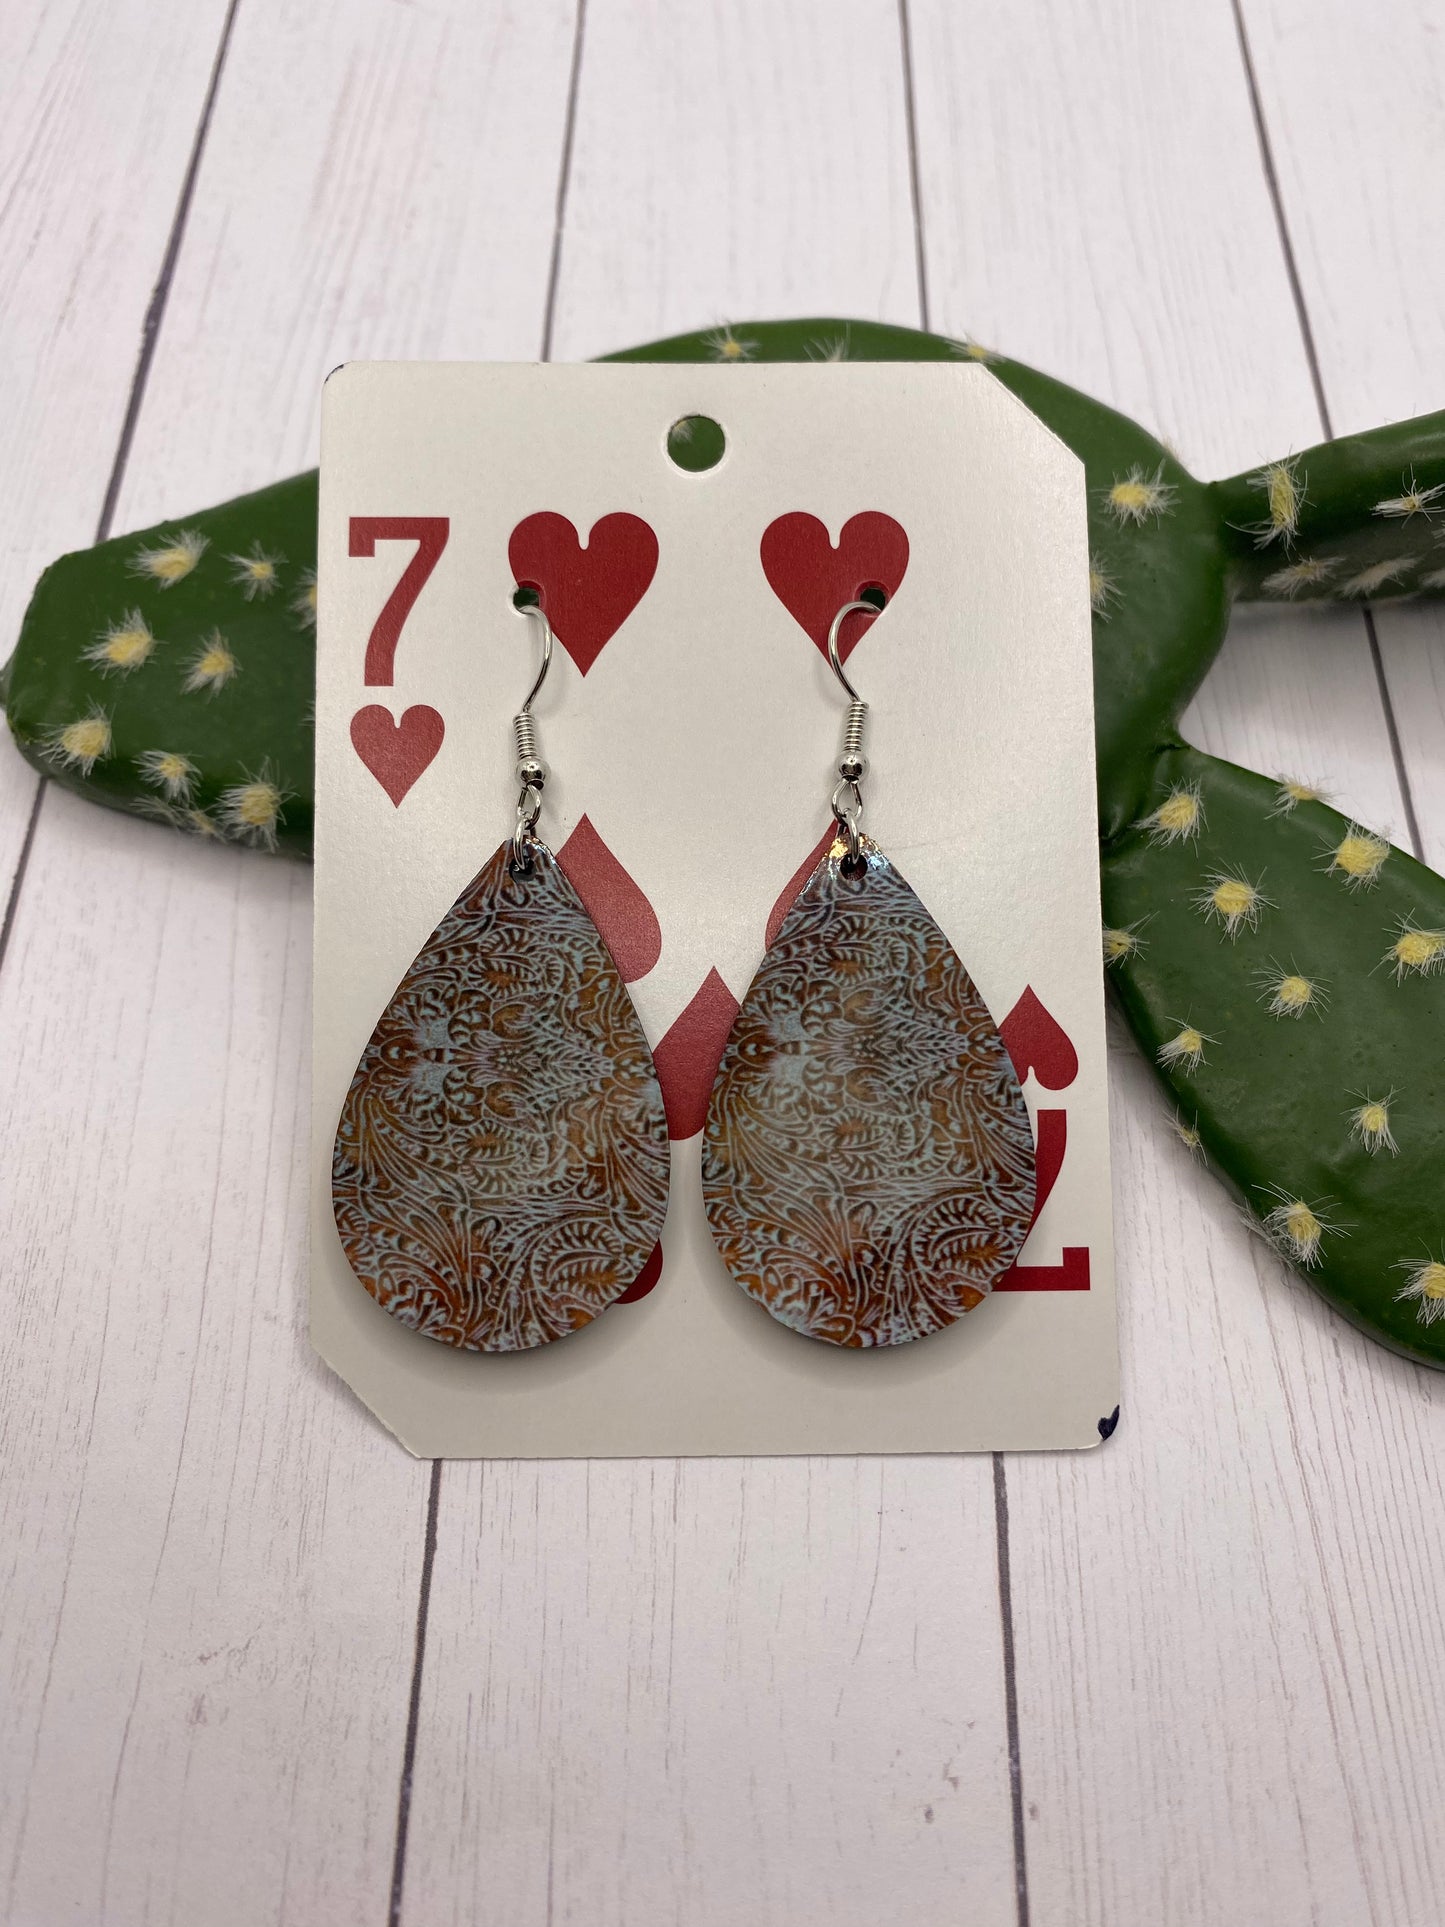 Turquoise Tooled Earrings